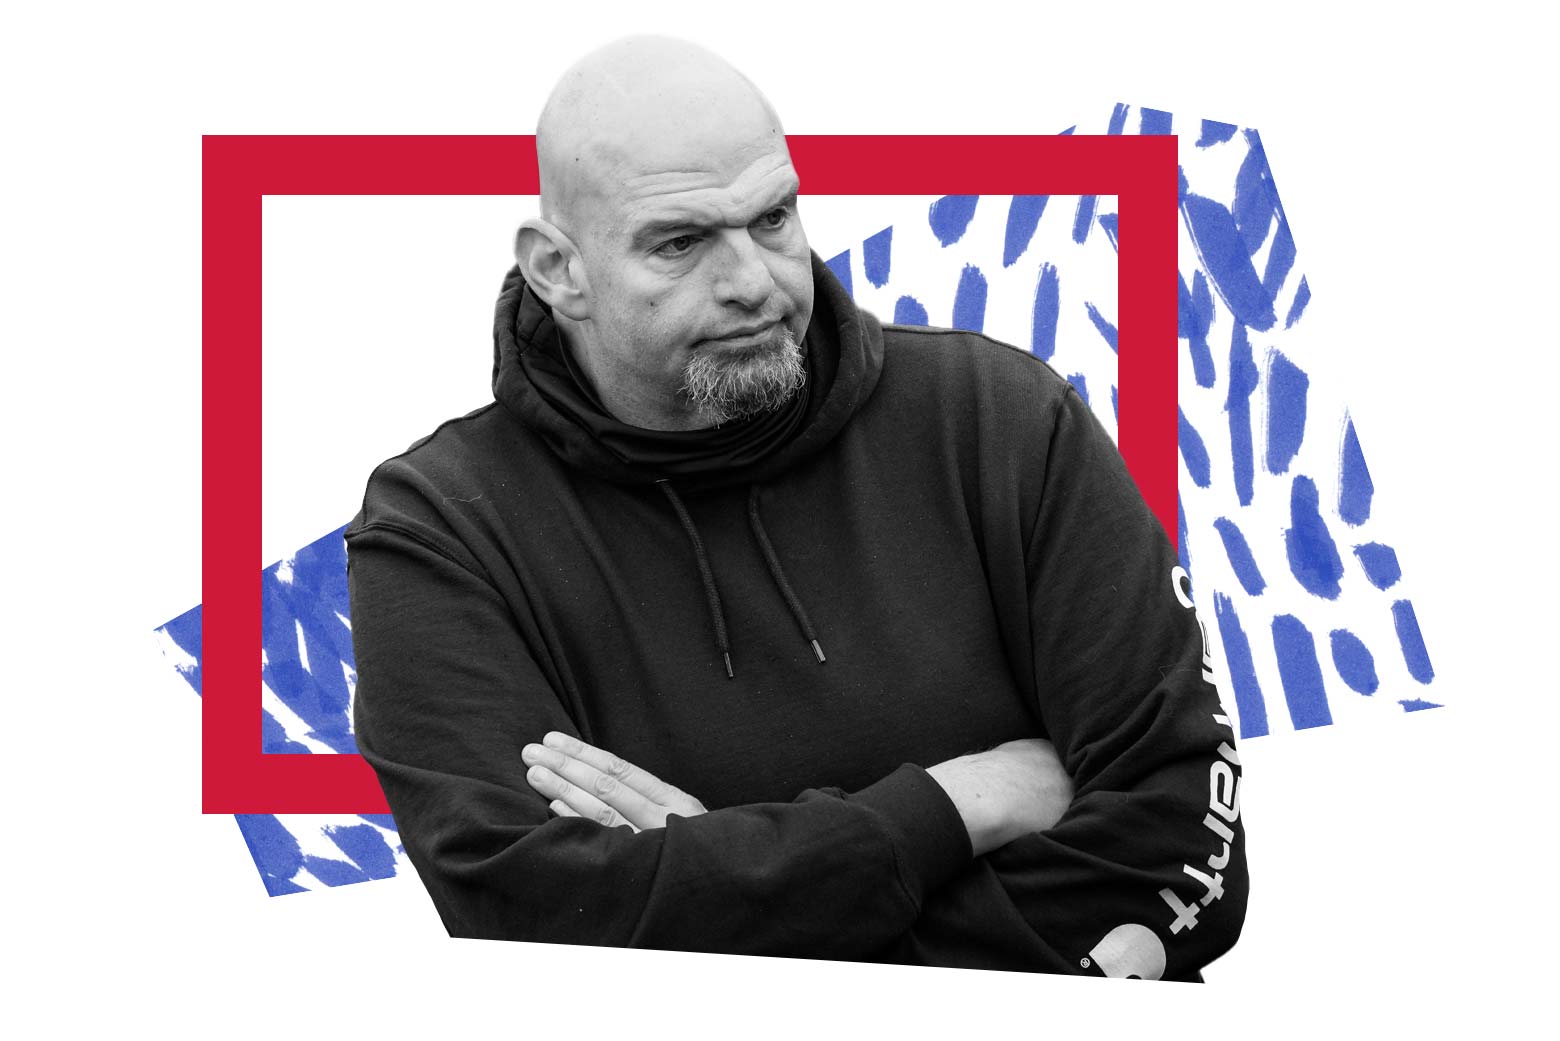 John Fetterman crosses his arms over his chest.